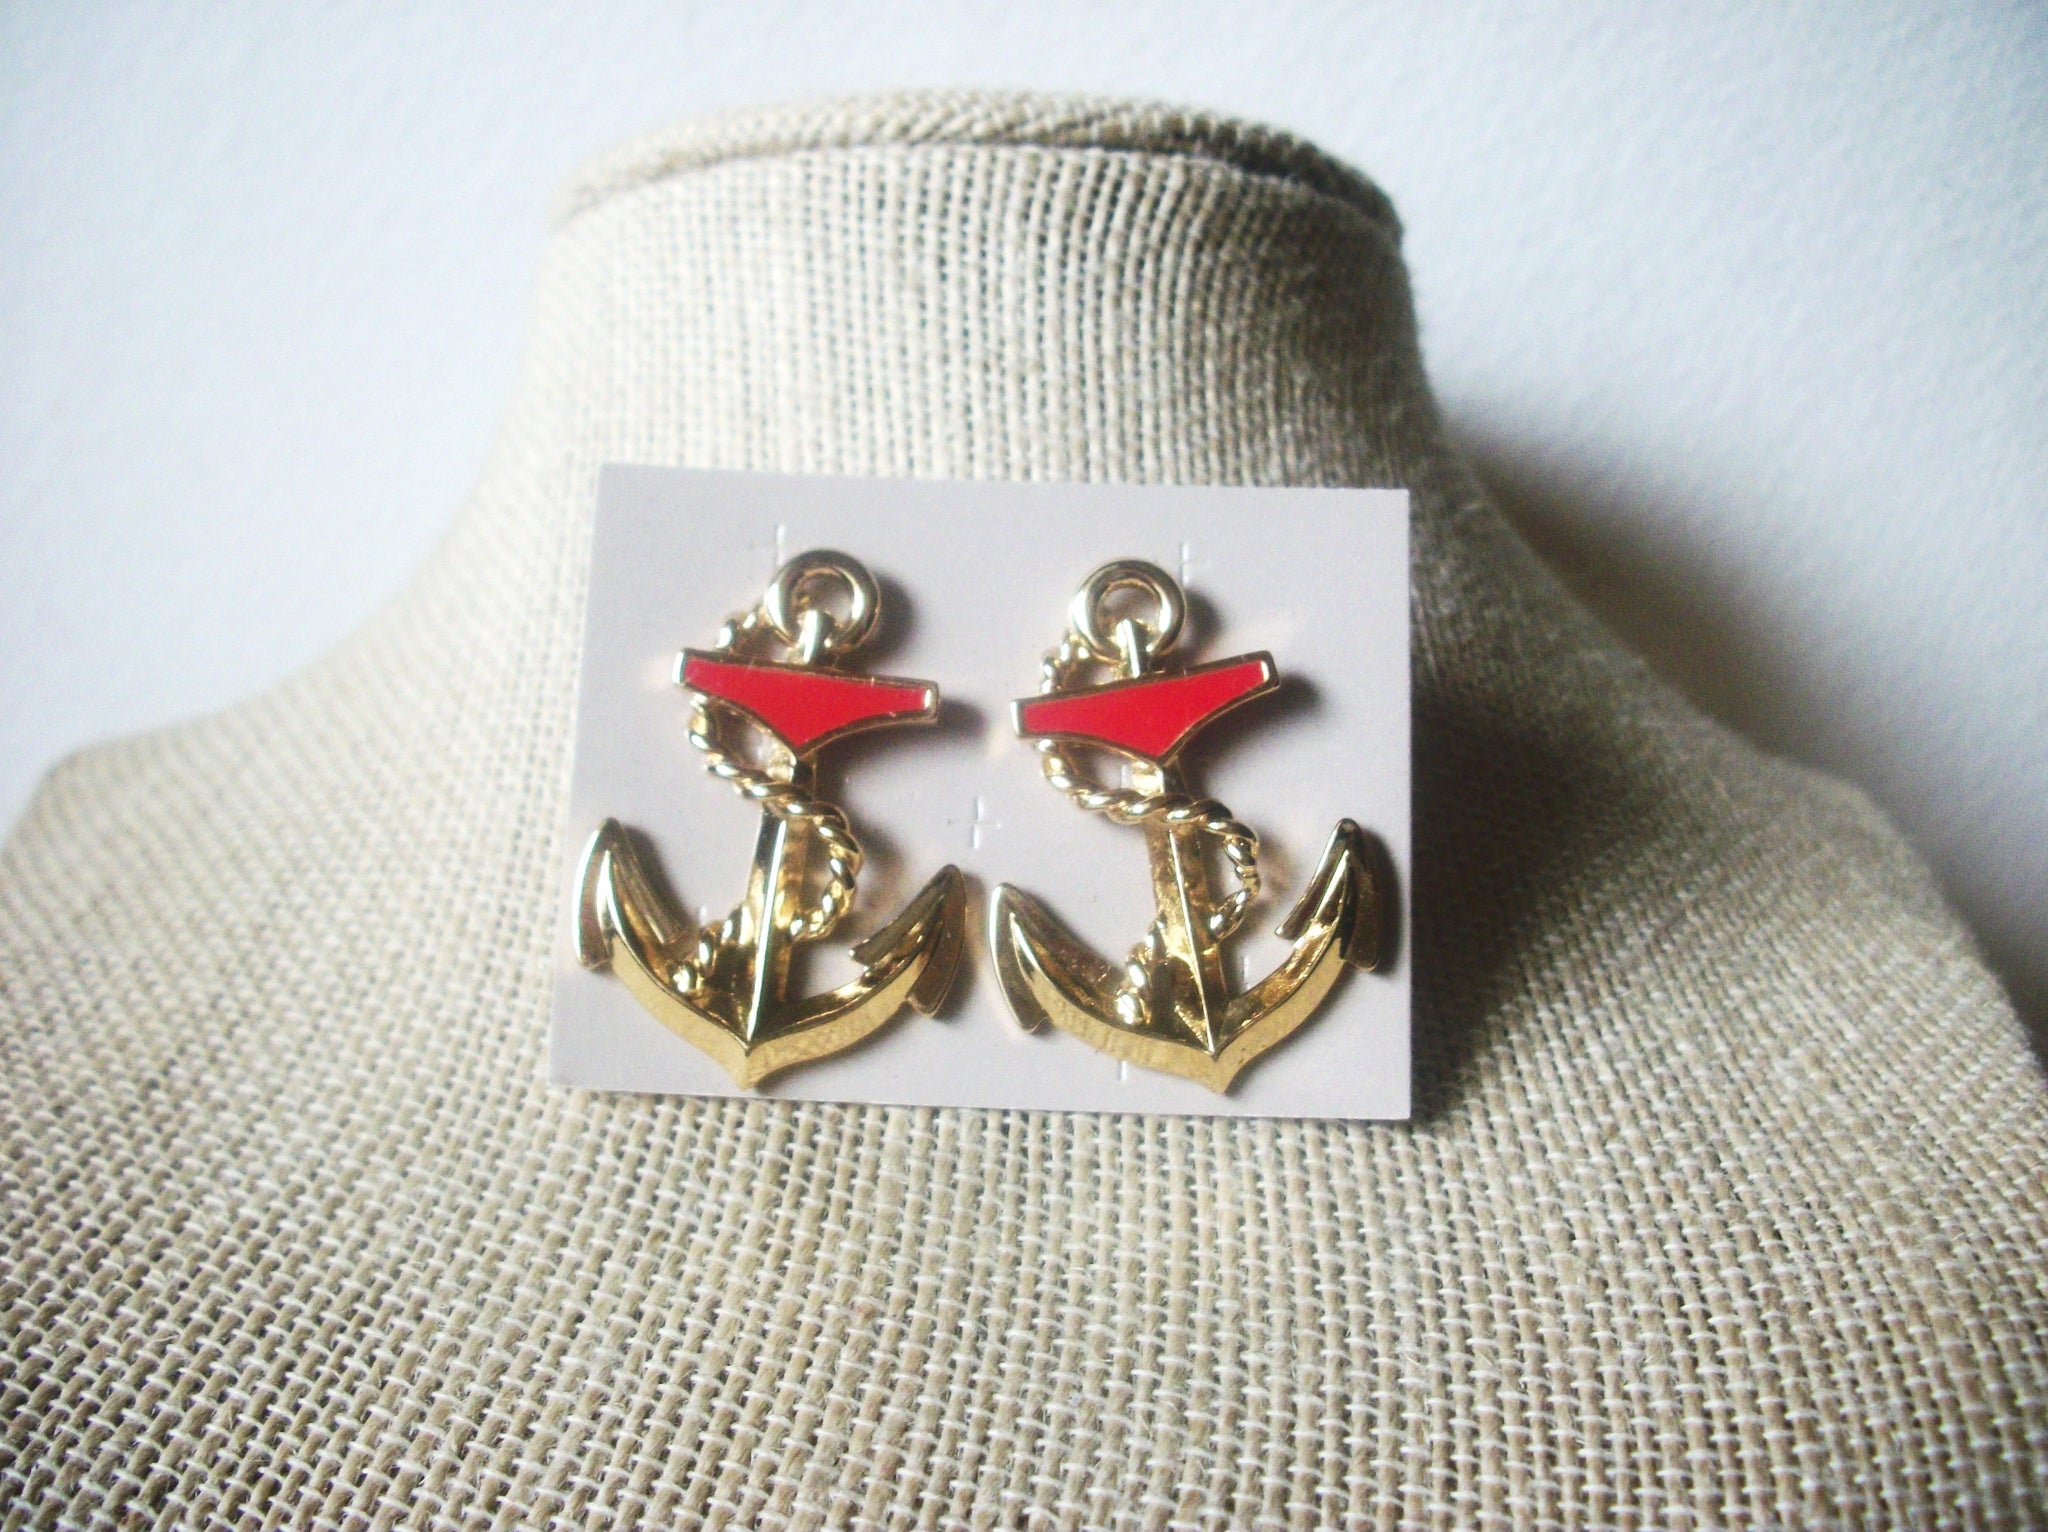 Vintage Earrings, Signed 1987 AVON, Anchor Enameled, Red Gold Tone, Pierced. 70417